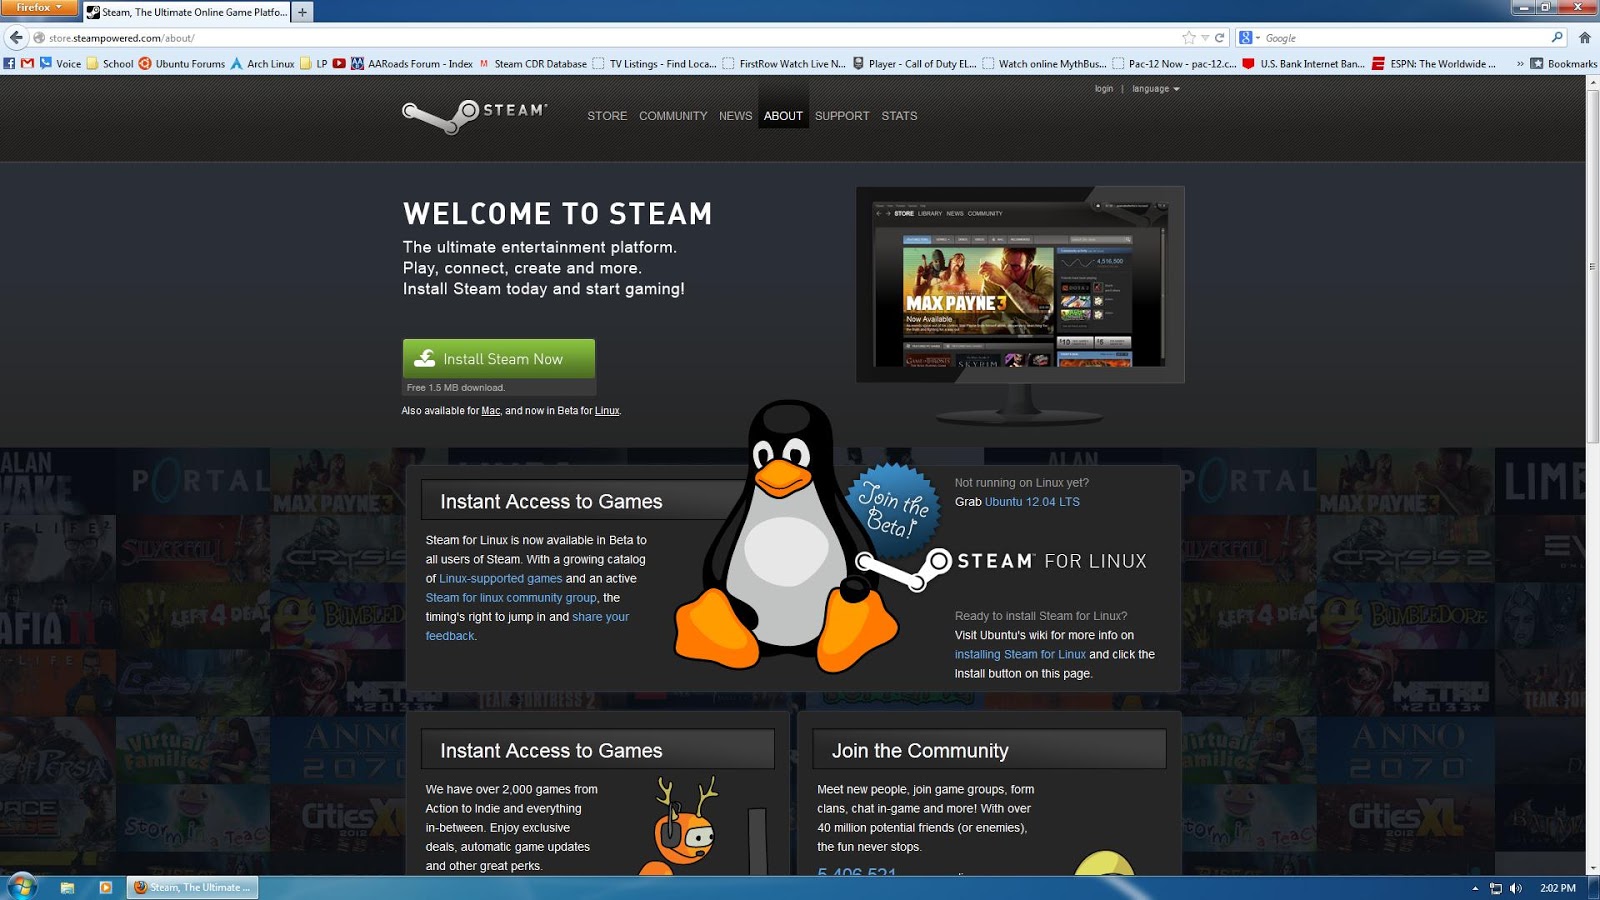 This game is not supported. Linux стим. Игры на линукс. Ubuntu Steam. Стим бета.